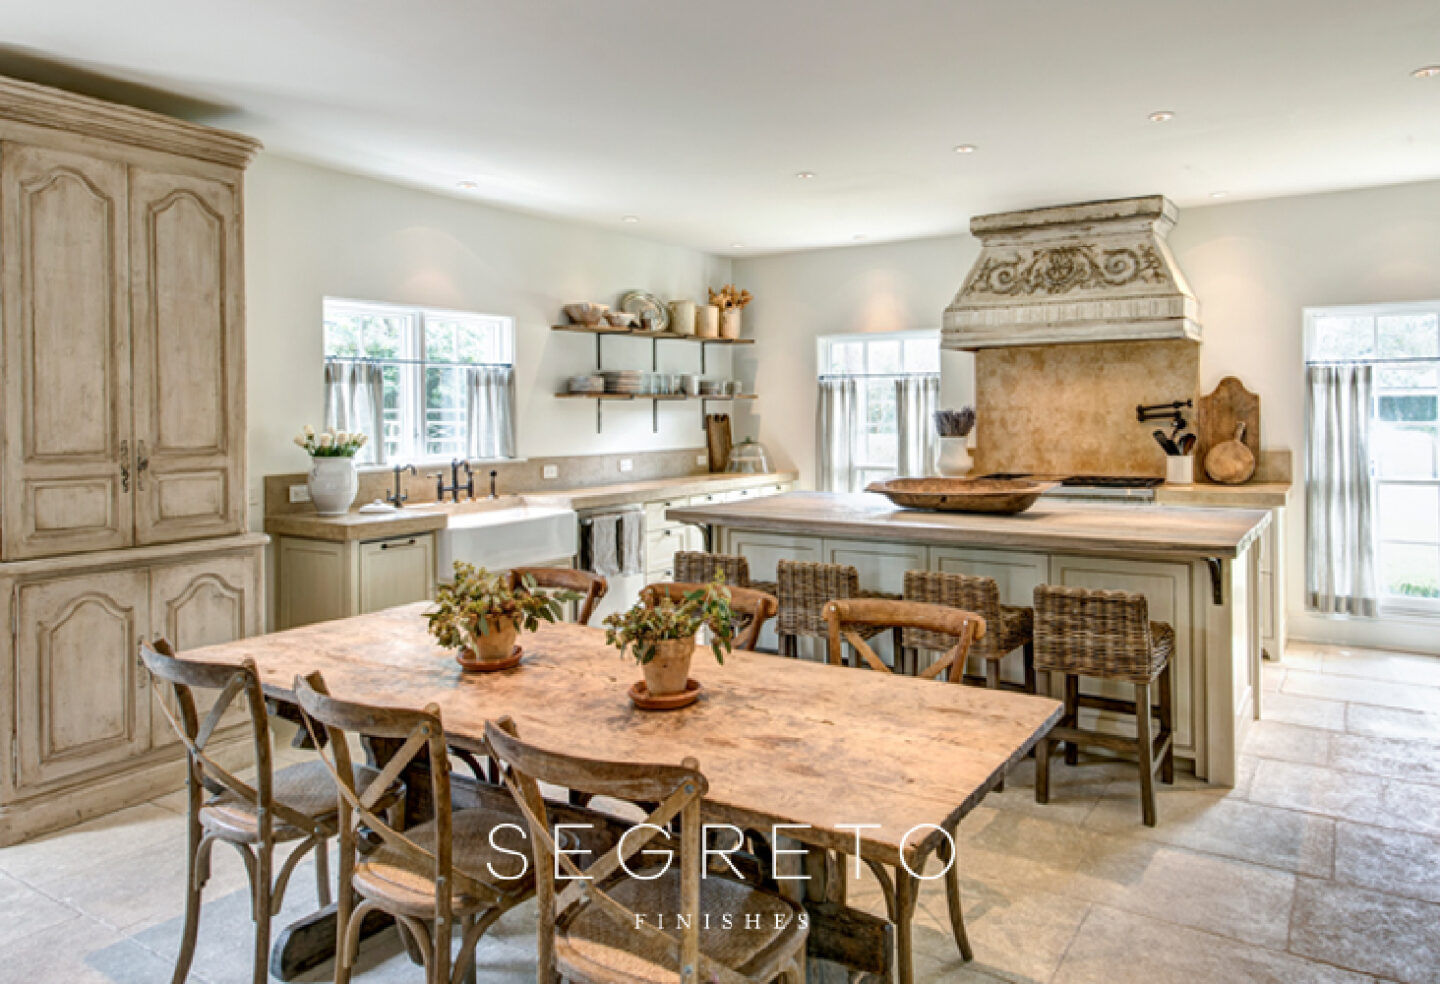 Rustic and elegant French country kitchen with plaster finishes and impeccable design - Segreto Finishes. #frenchkitchen